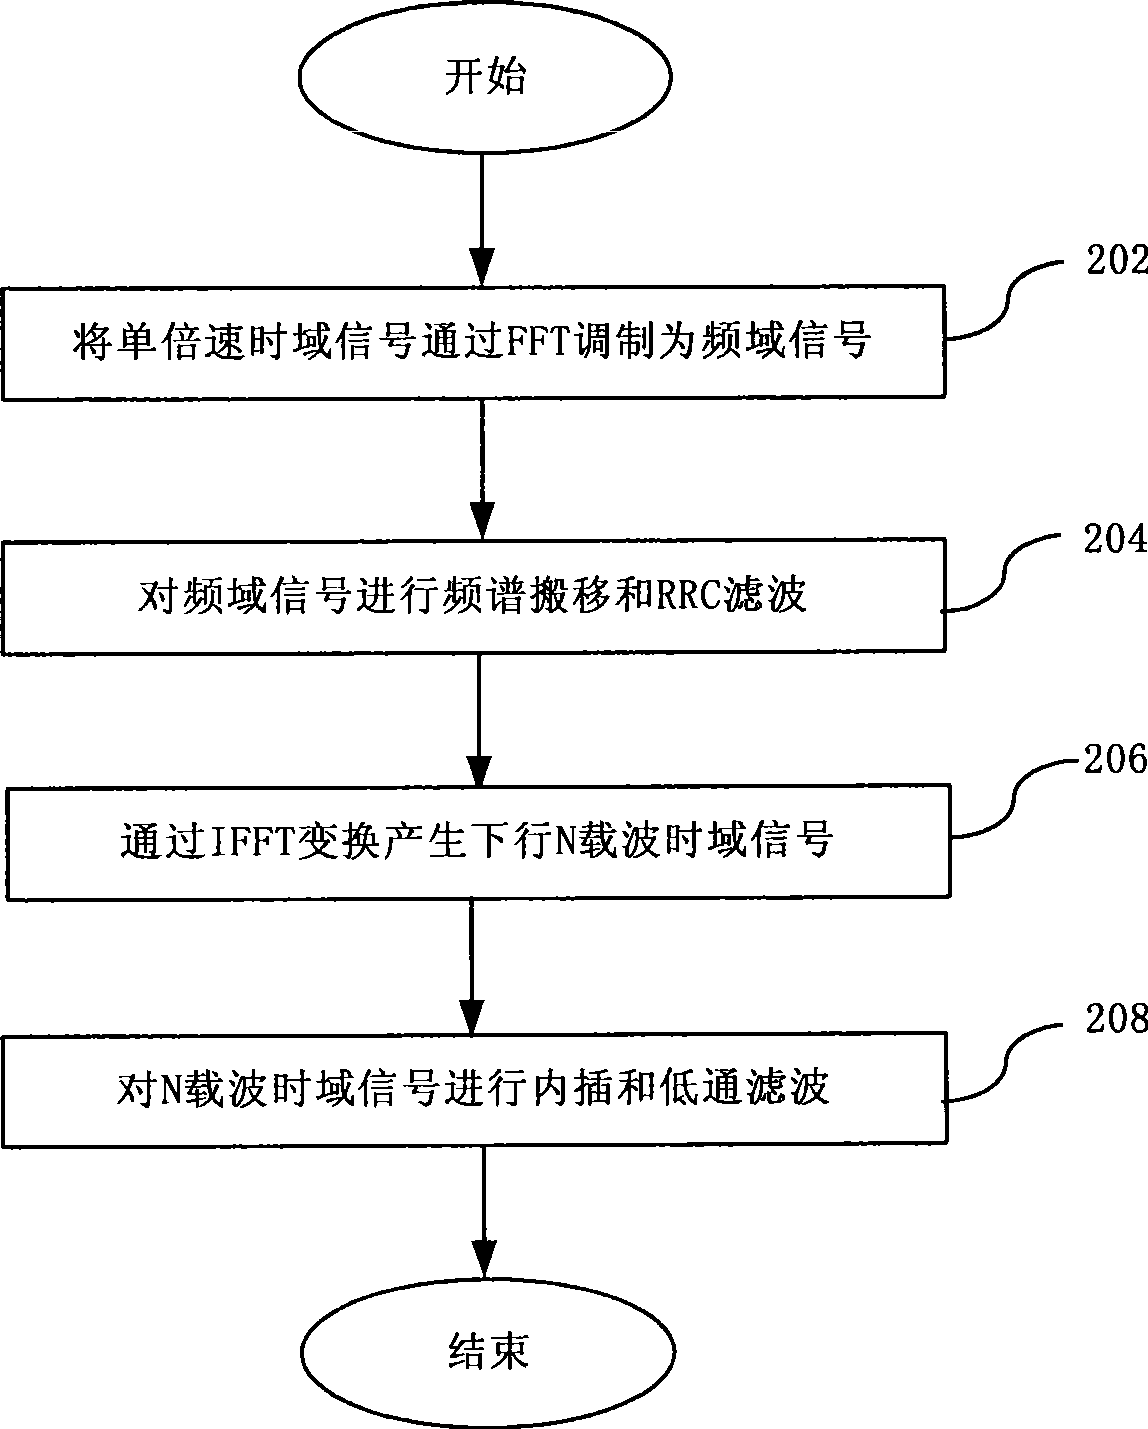 Multi-carrier implementing method and apparatus for TD-SCDMA system